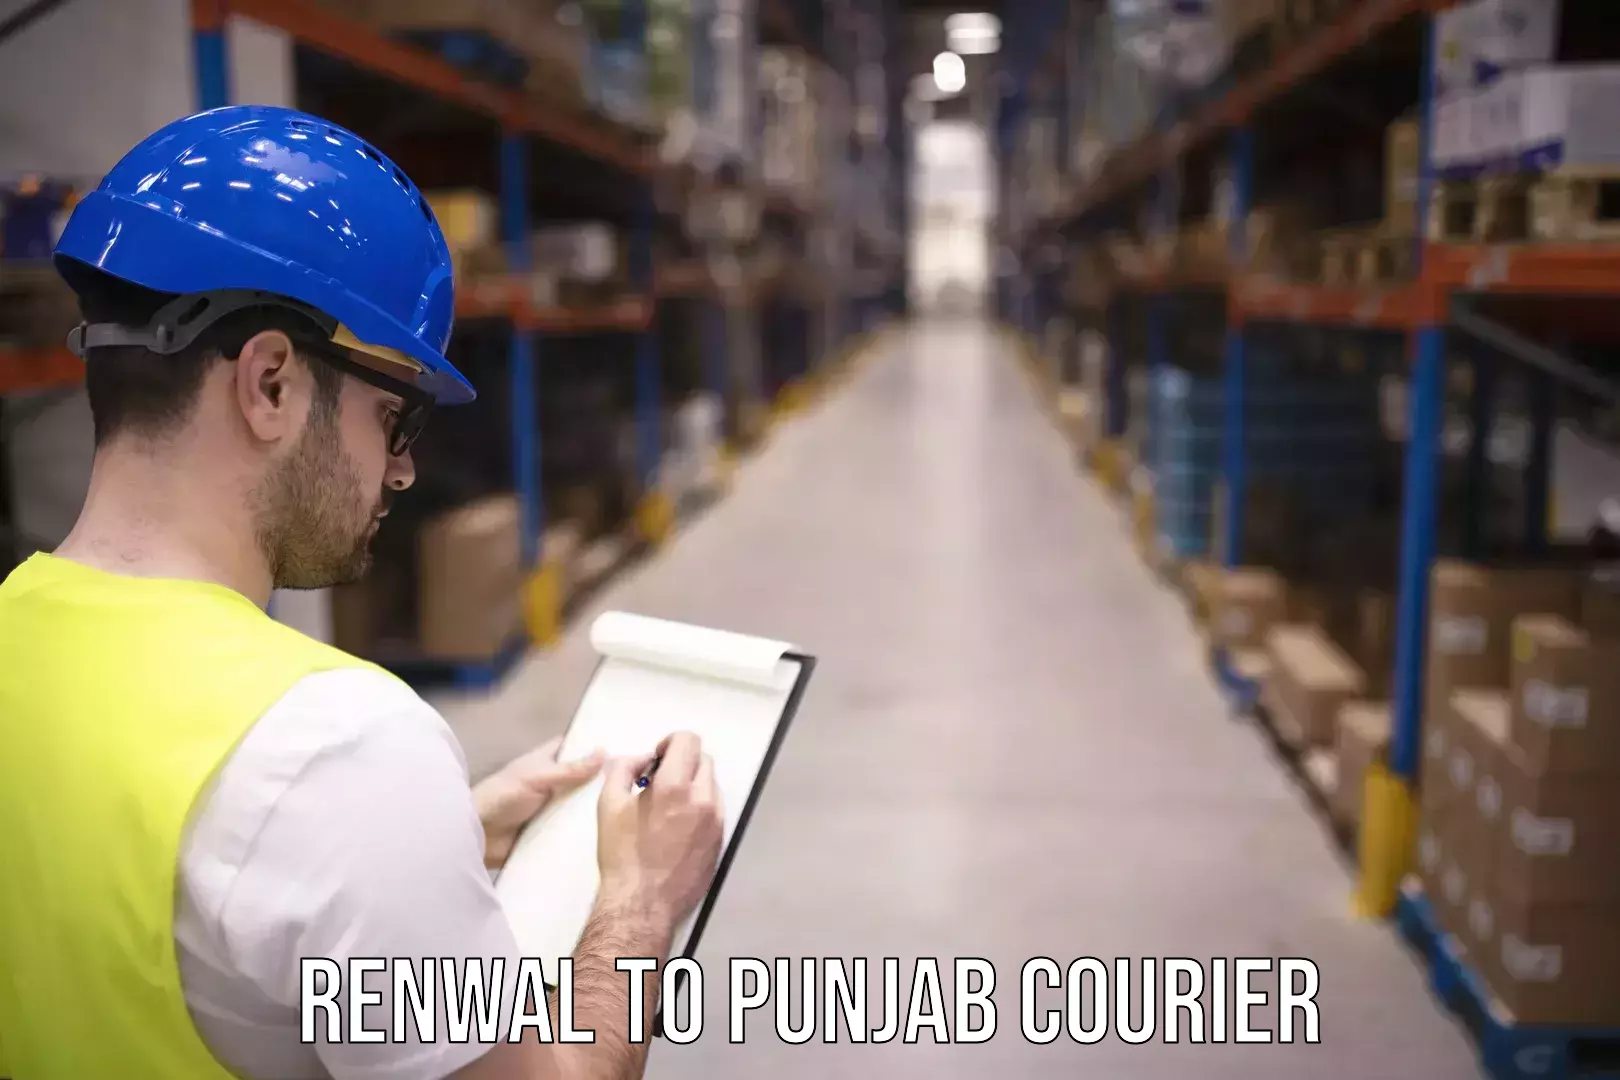 24/7 courier service Renwal to Punjab